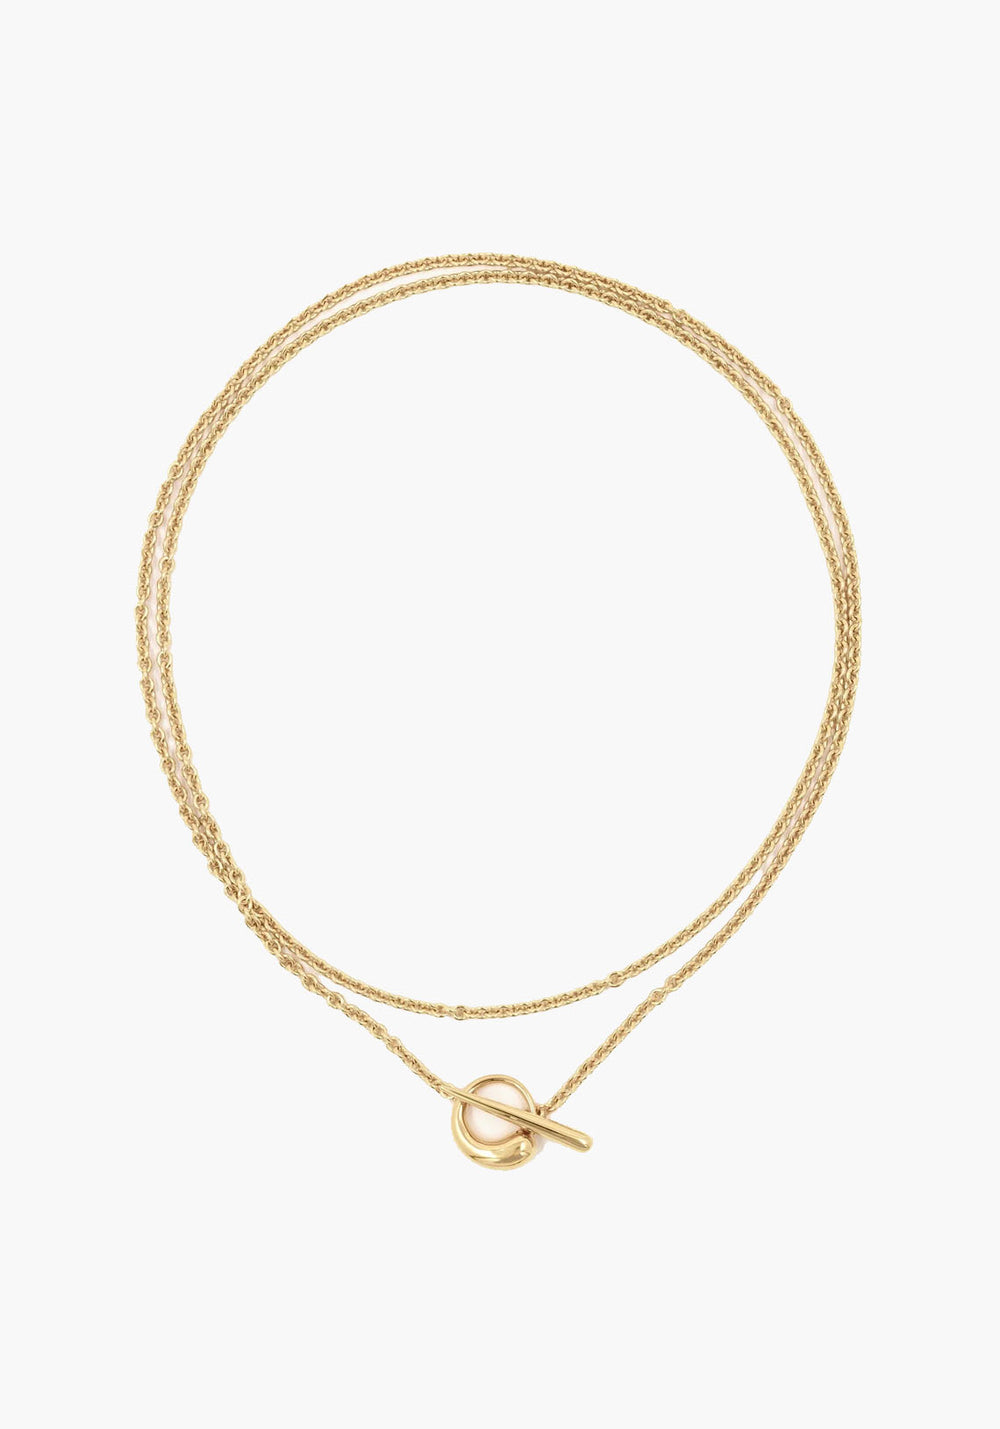 OCULUS 15026 BRASS WITH 18K GOLD PLATING NECKLACE